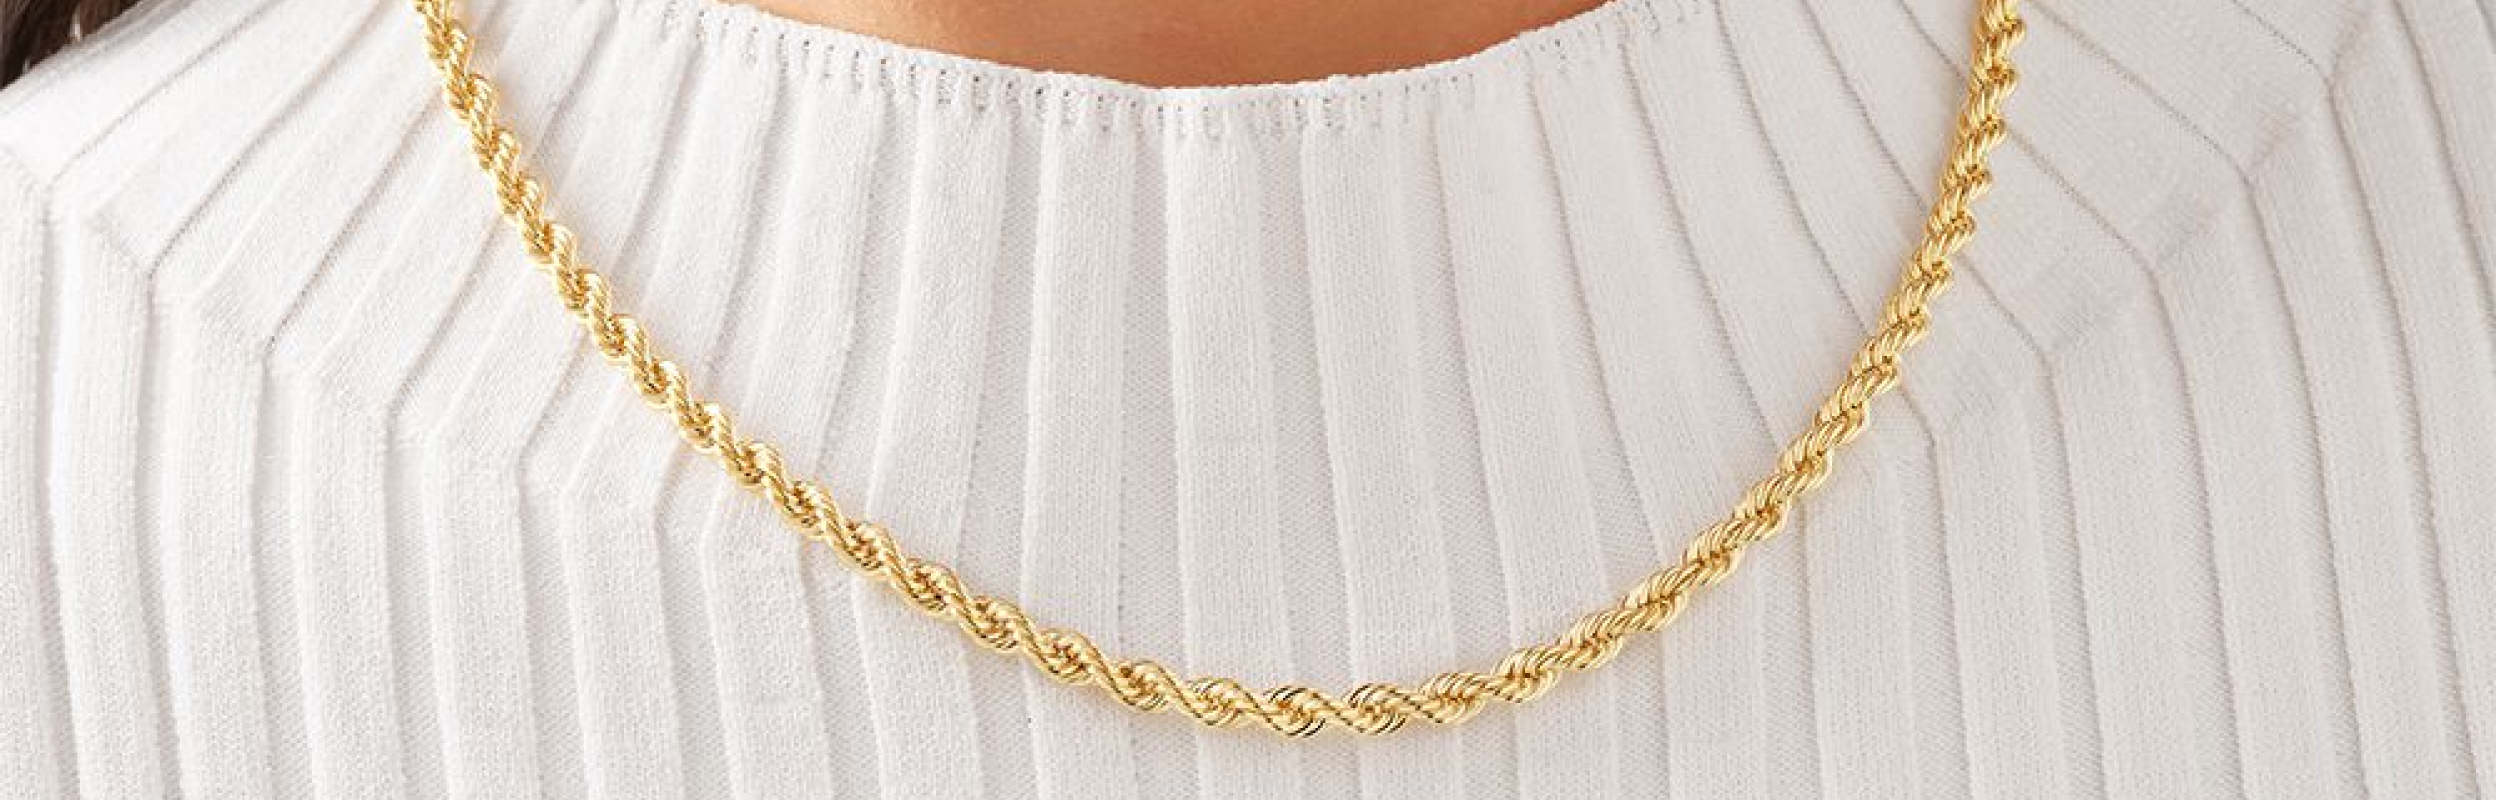 chunky gold choker rope chain necklace on woman